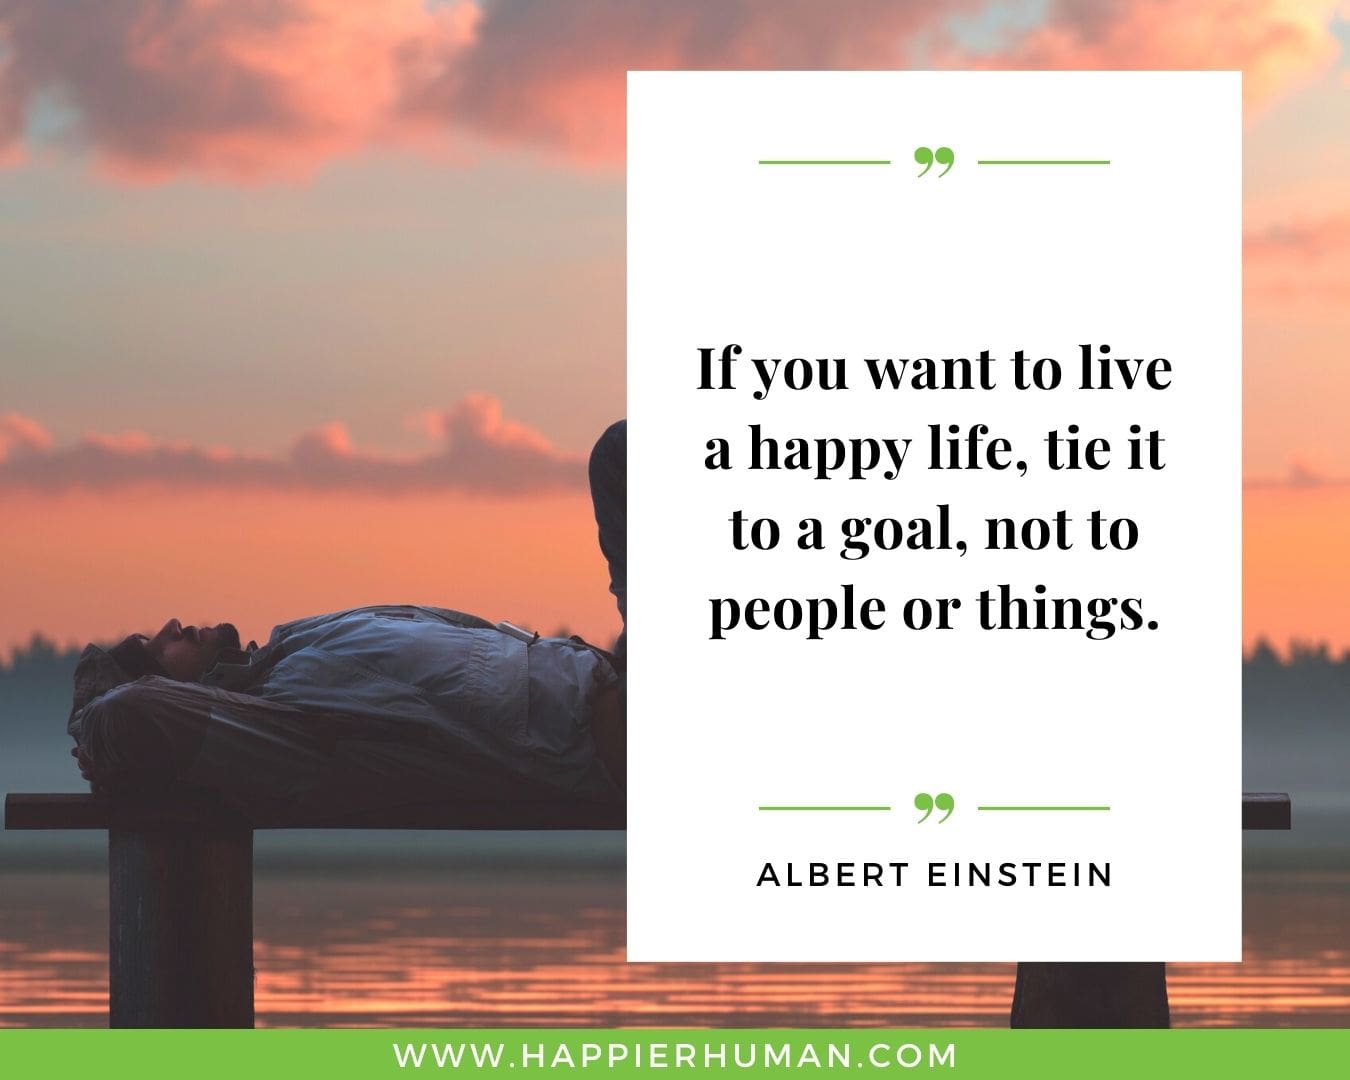 Overthinking Quotes - “If you want to live a happy life, tie it to a goal, not to people or things.” - Albert Einstein